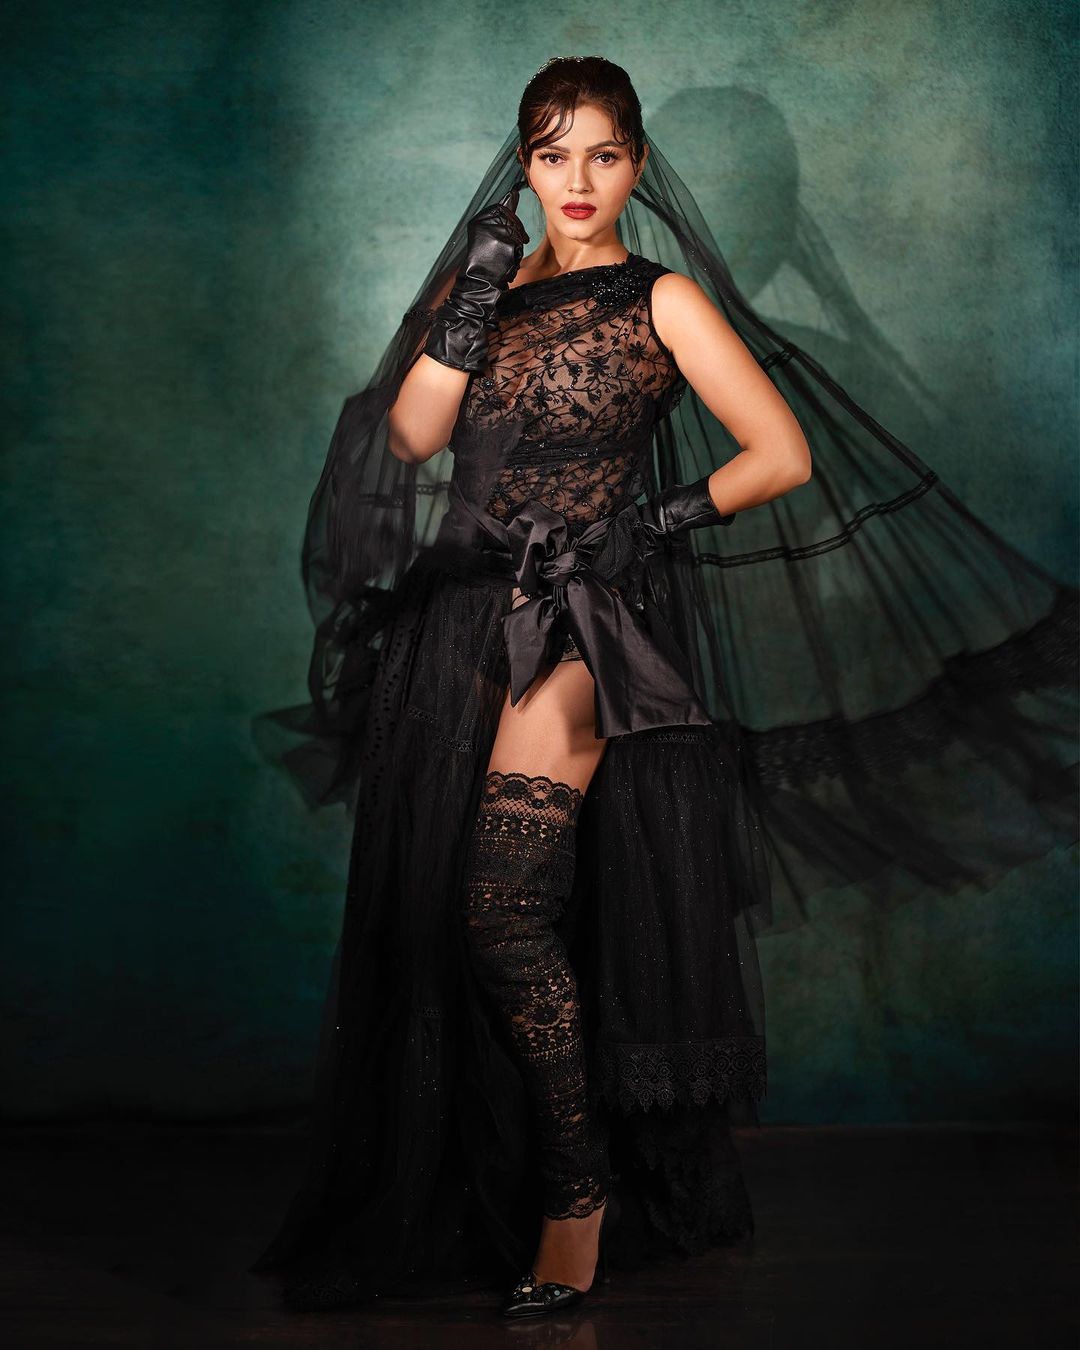 Rubina Dilaik oozed glamour in the semi-sheer black look, complete with gloves and a veil.